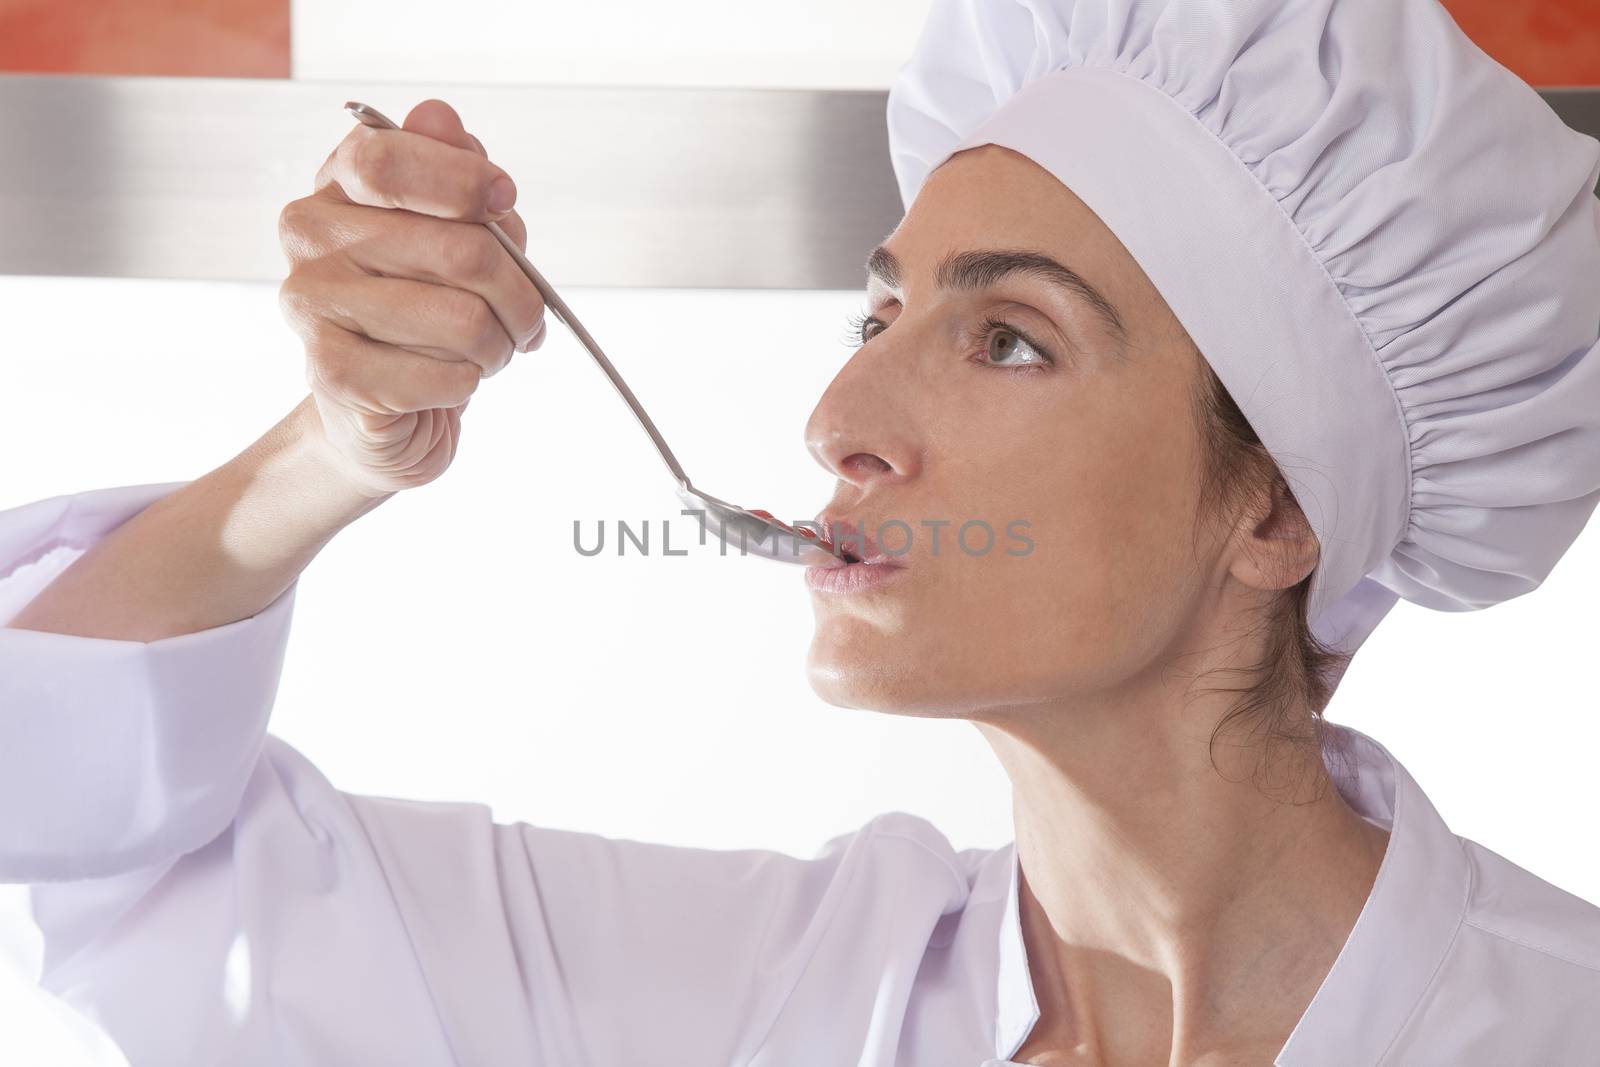 portrait of chef woman with professional jacket and hat tasting red sauce or cream puree like tomato ketchup in a steel soup spoon in her hand